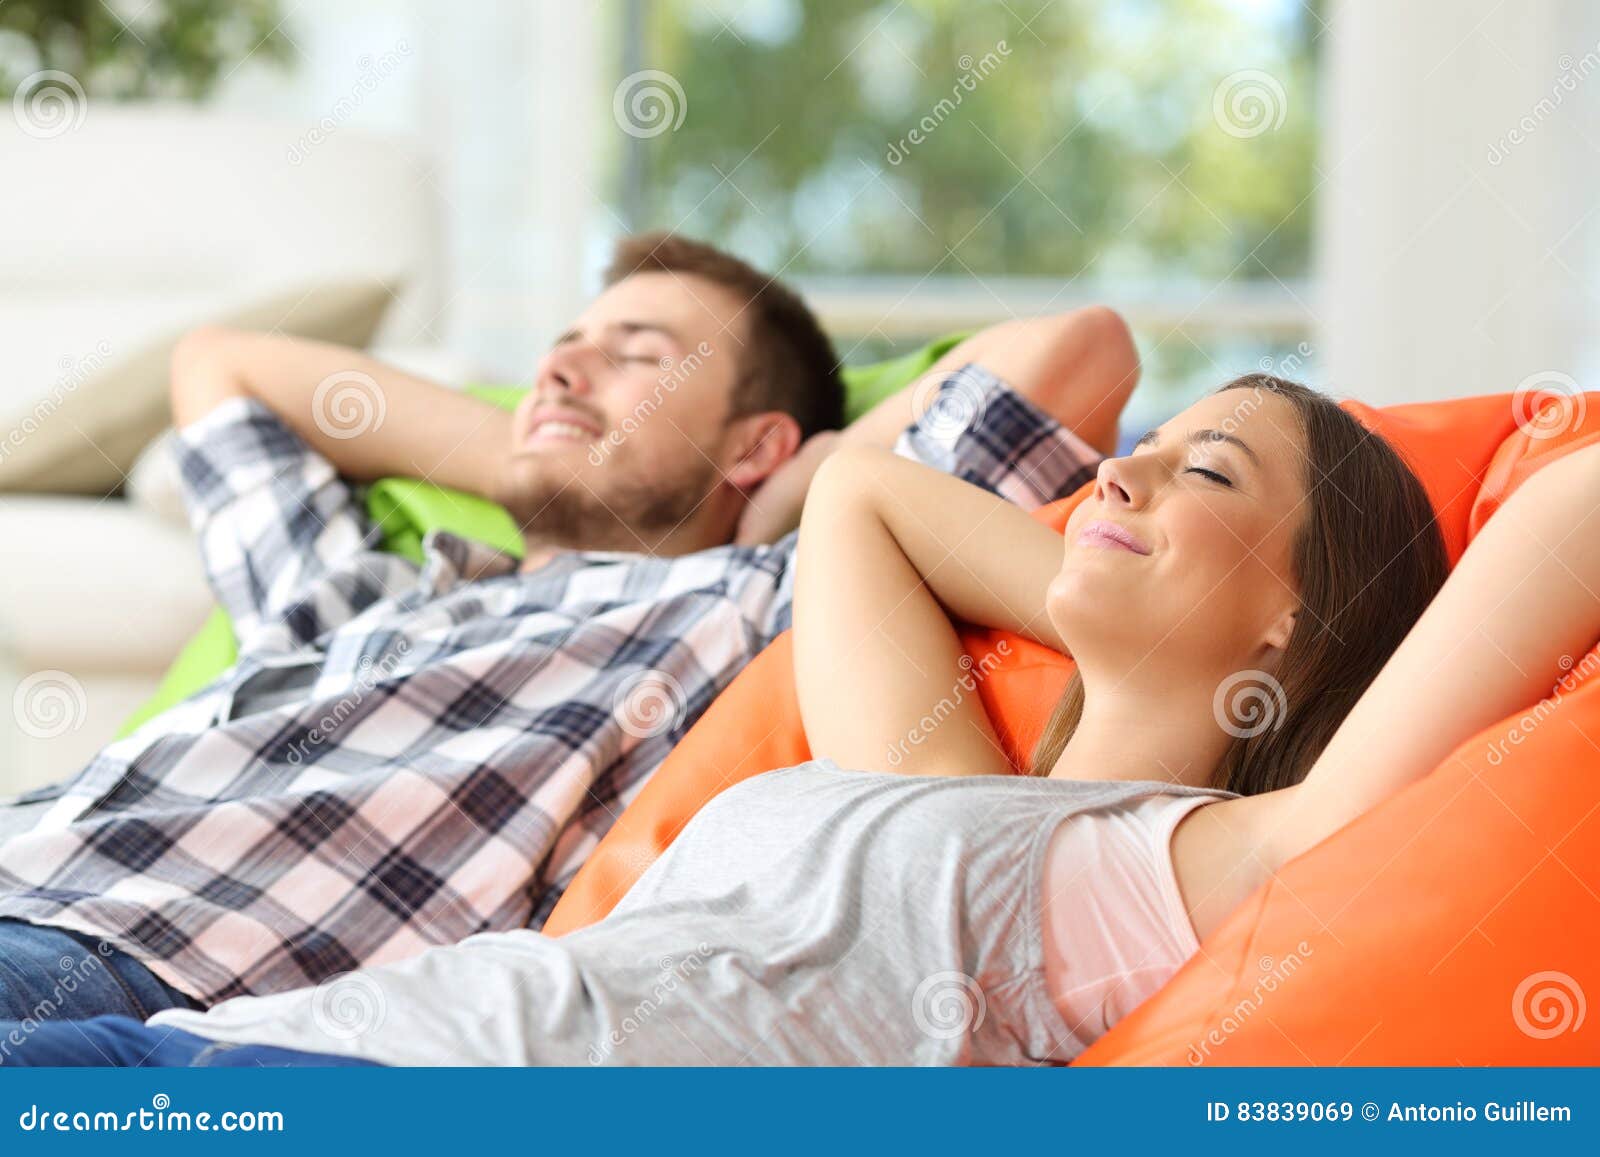 couple or roommates relaxing at home